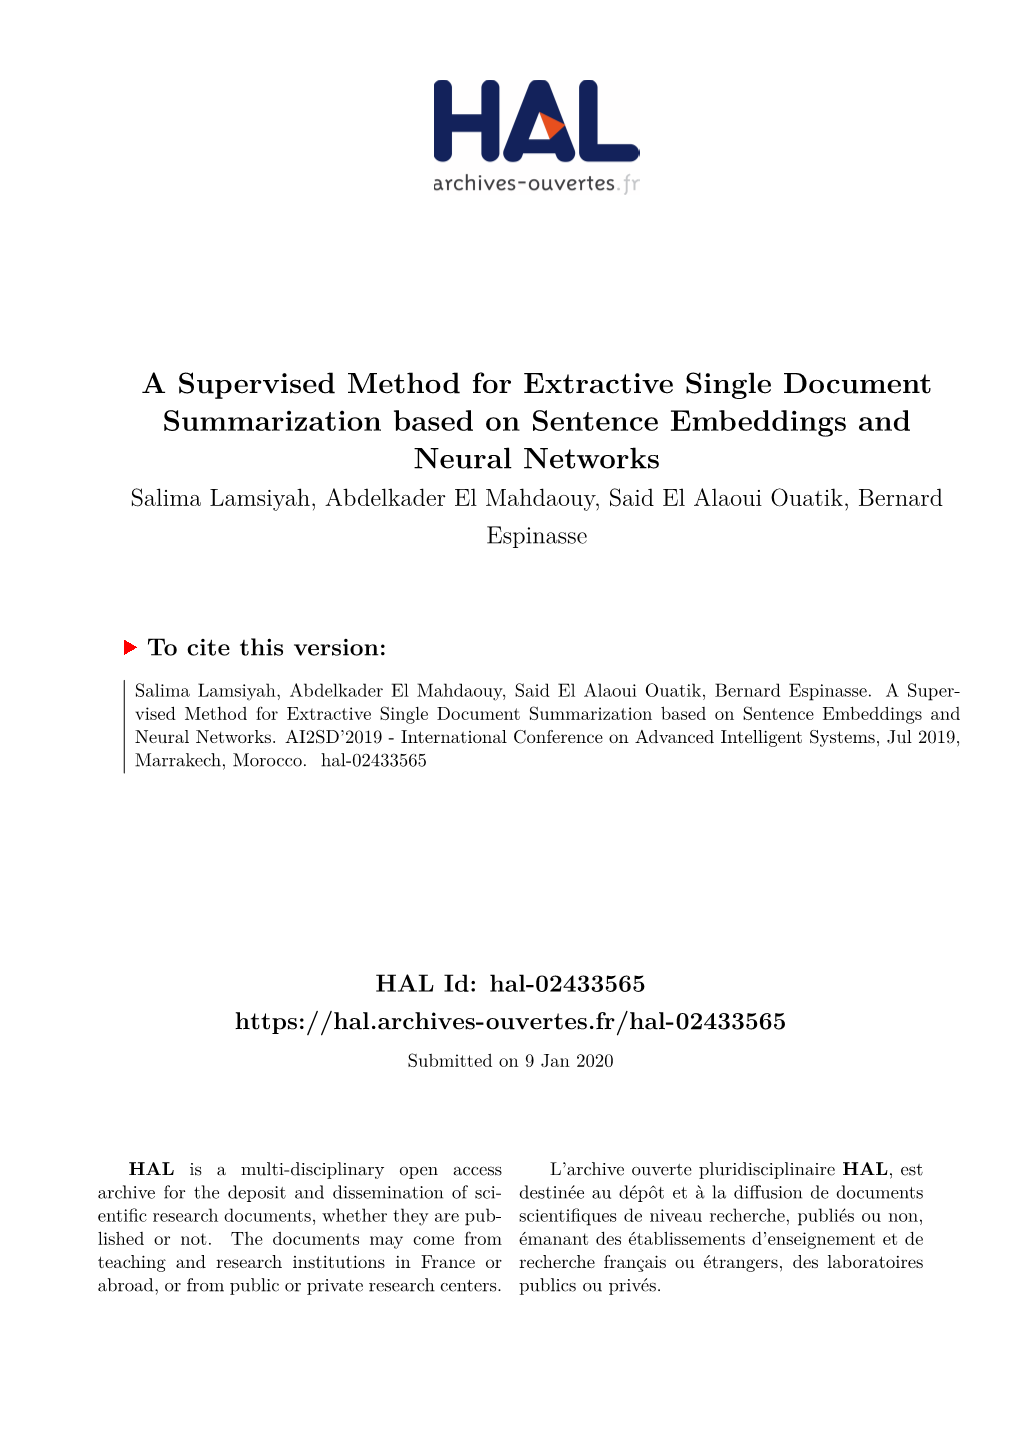 A Supervised Method for Extractive Single Document Summarization